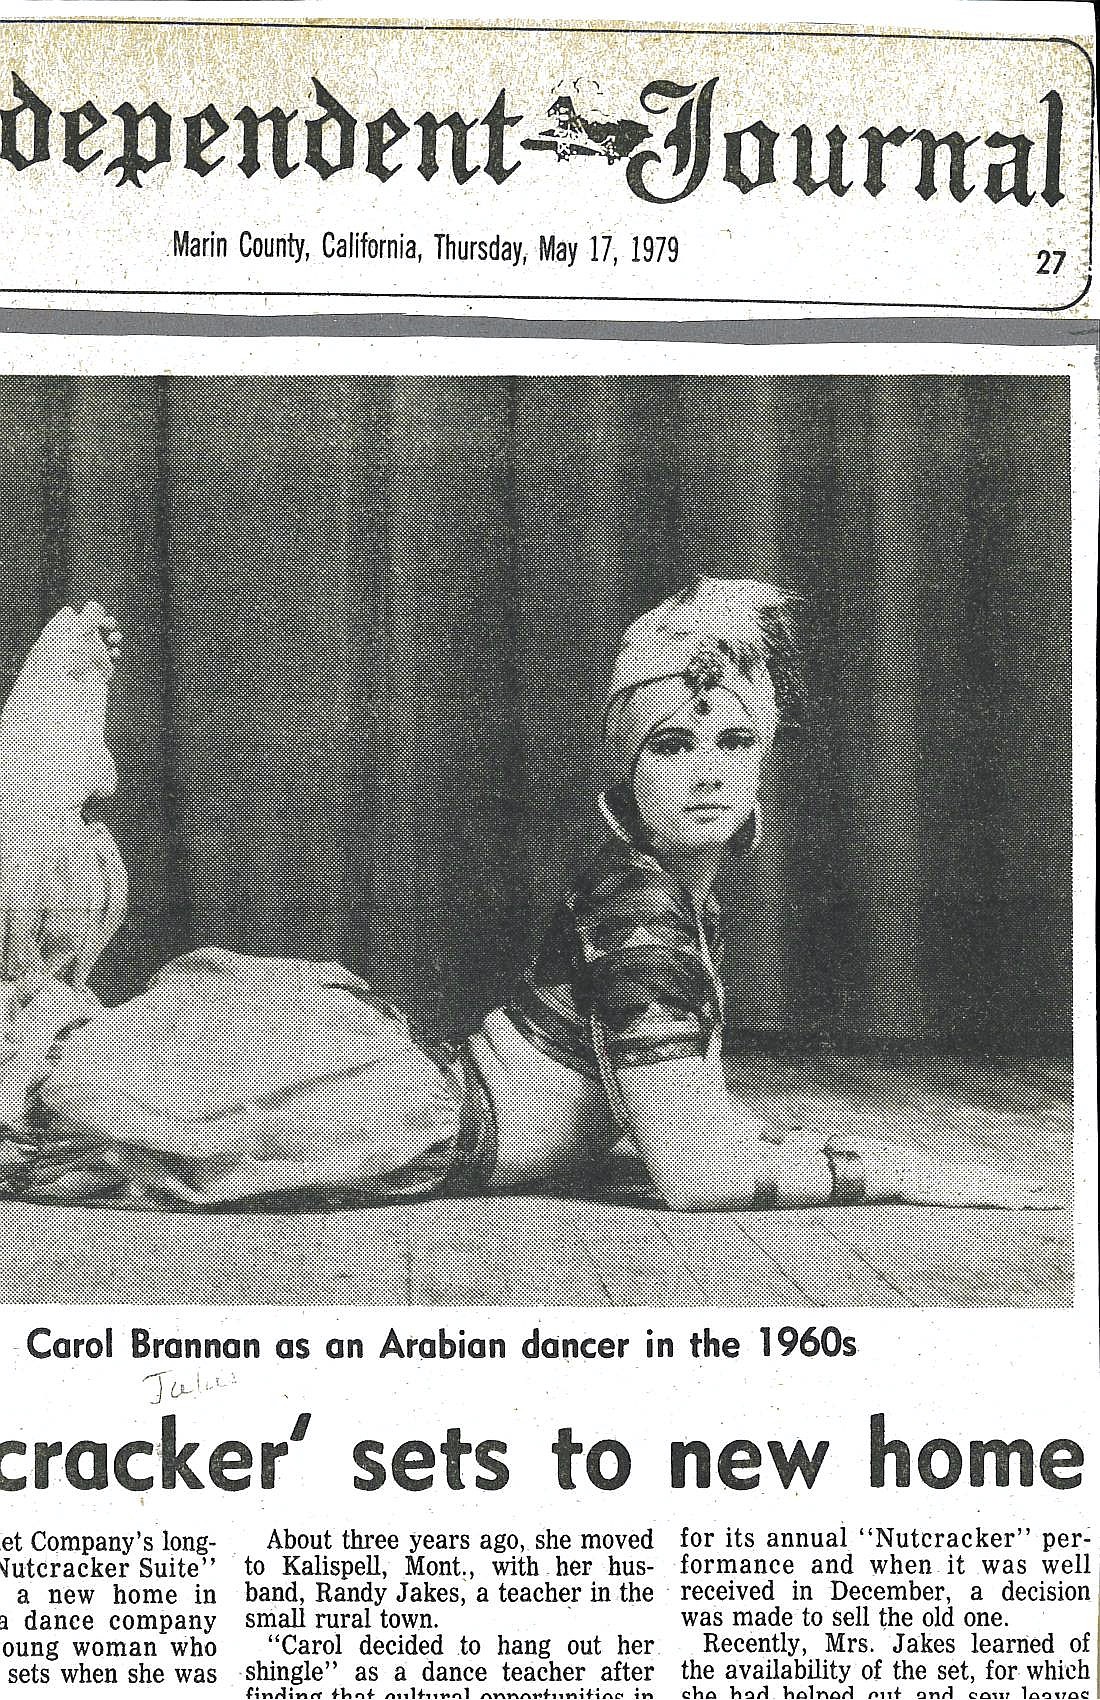 Carol (Brannan) Sullivan as the Arabian Dancer in The Marin Ballet Co.'s "Nutcracker" performance in the 1960s. The image was later used in 1979 by the Independent-Journal newspaper in Marin County, California, for an article about Sullivan acquiring Marin Ballet's "Nutcracker" set for her own productions as director of her dance school in Kalispell.